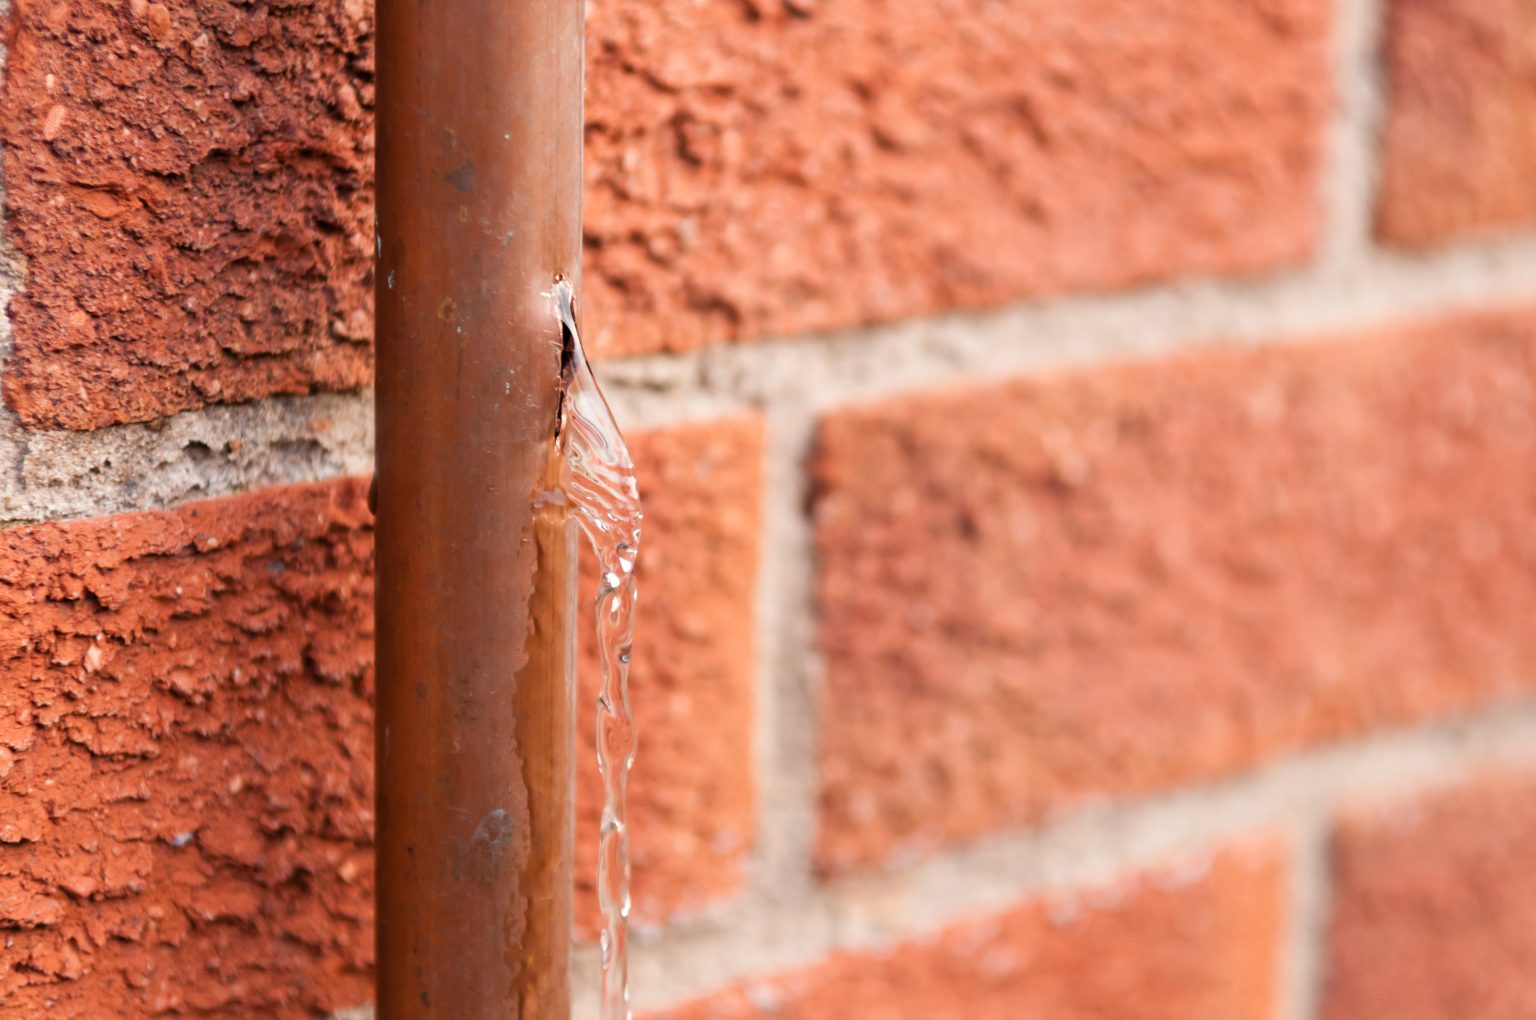 How To Prevent Water Damage When Pipes Burst